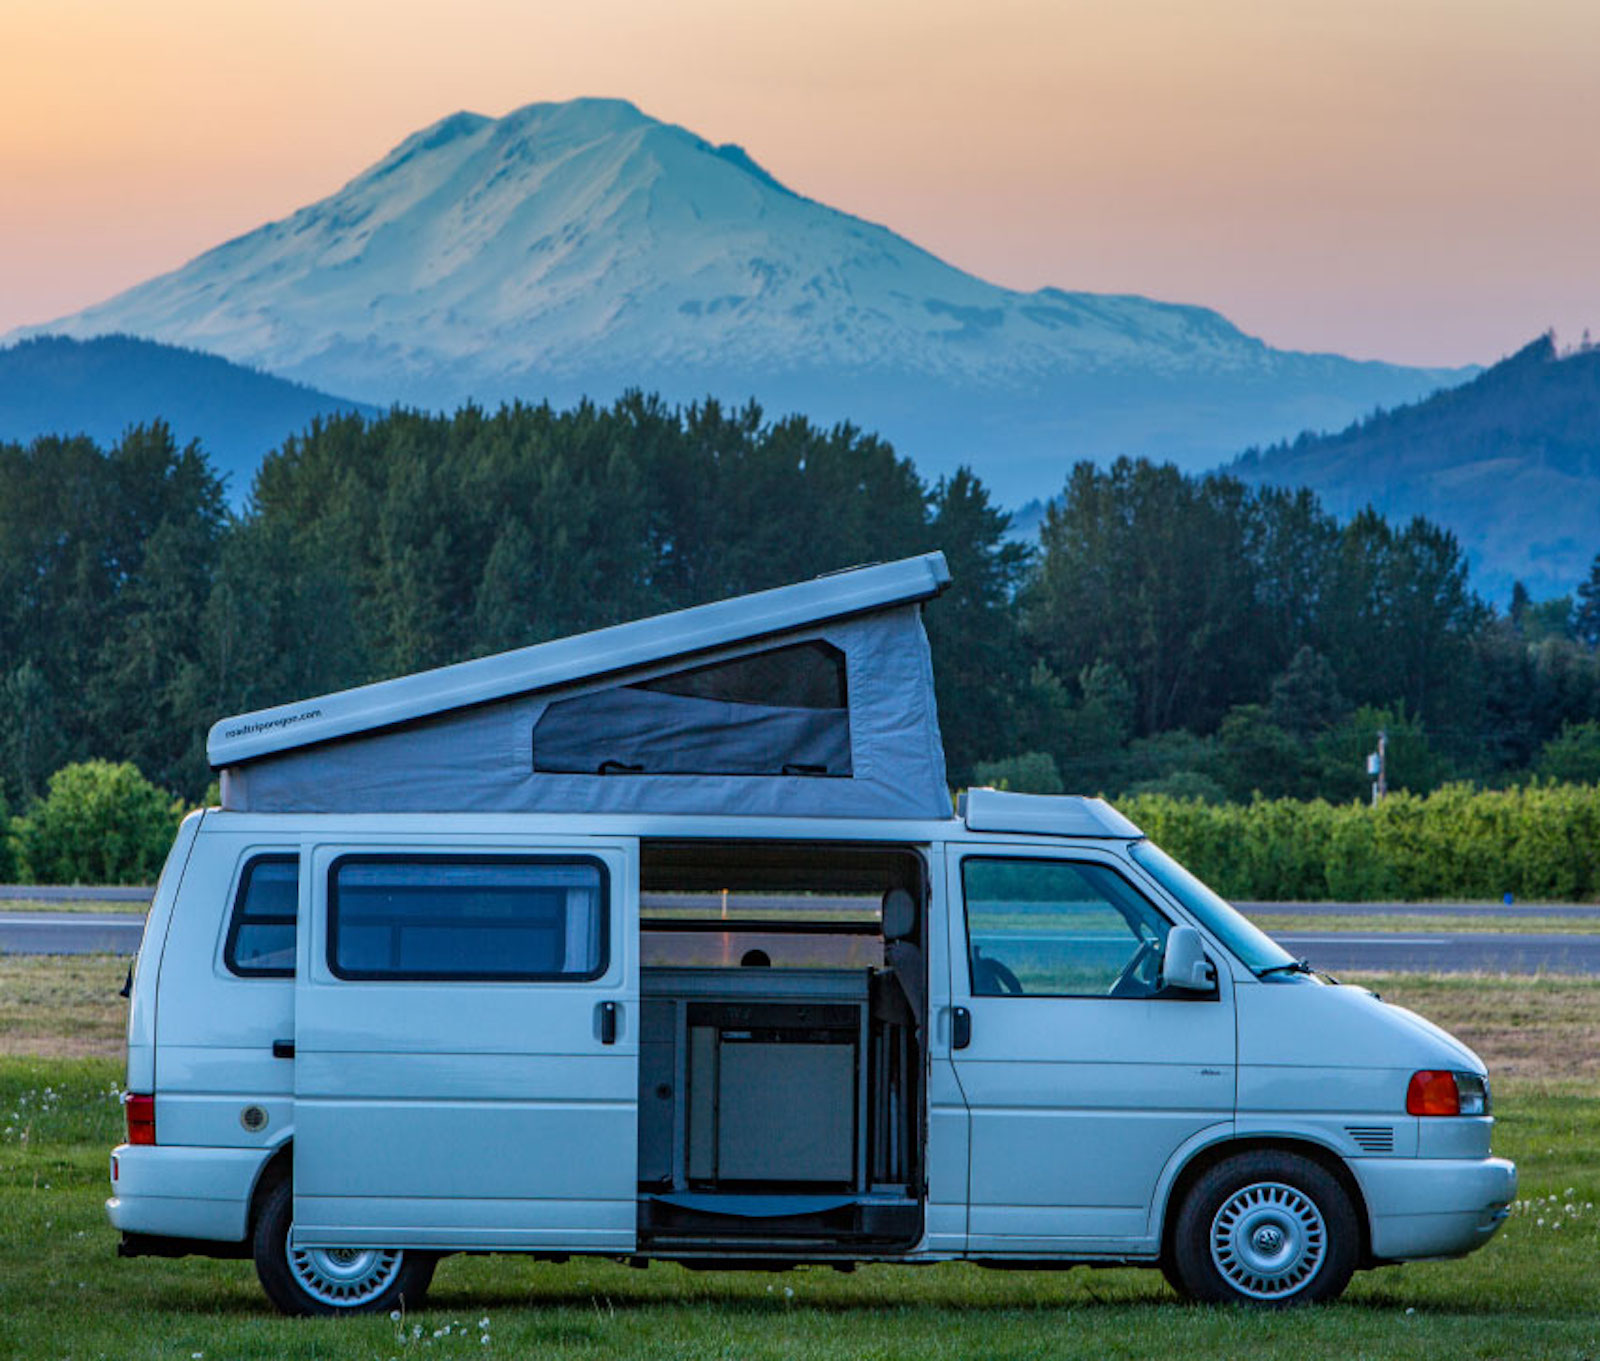 A Volkswagen European parked in a field at dusk with a mountainous backdrop and the pop top open